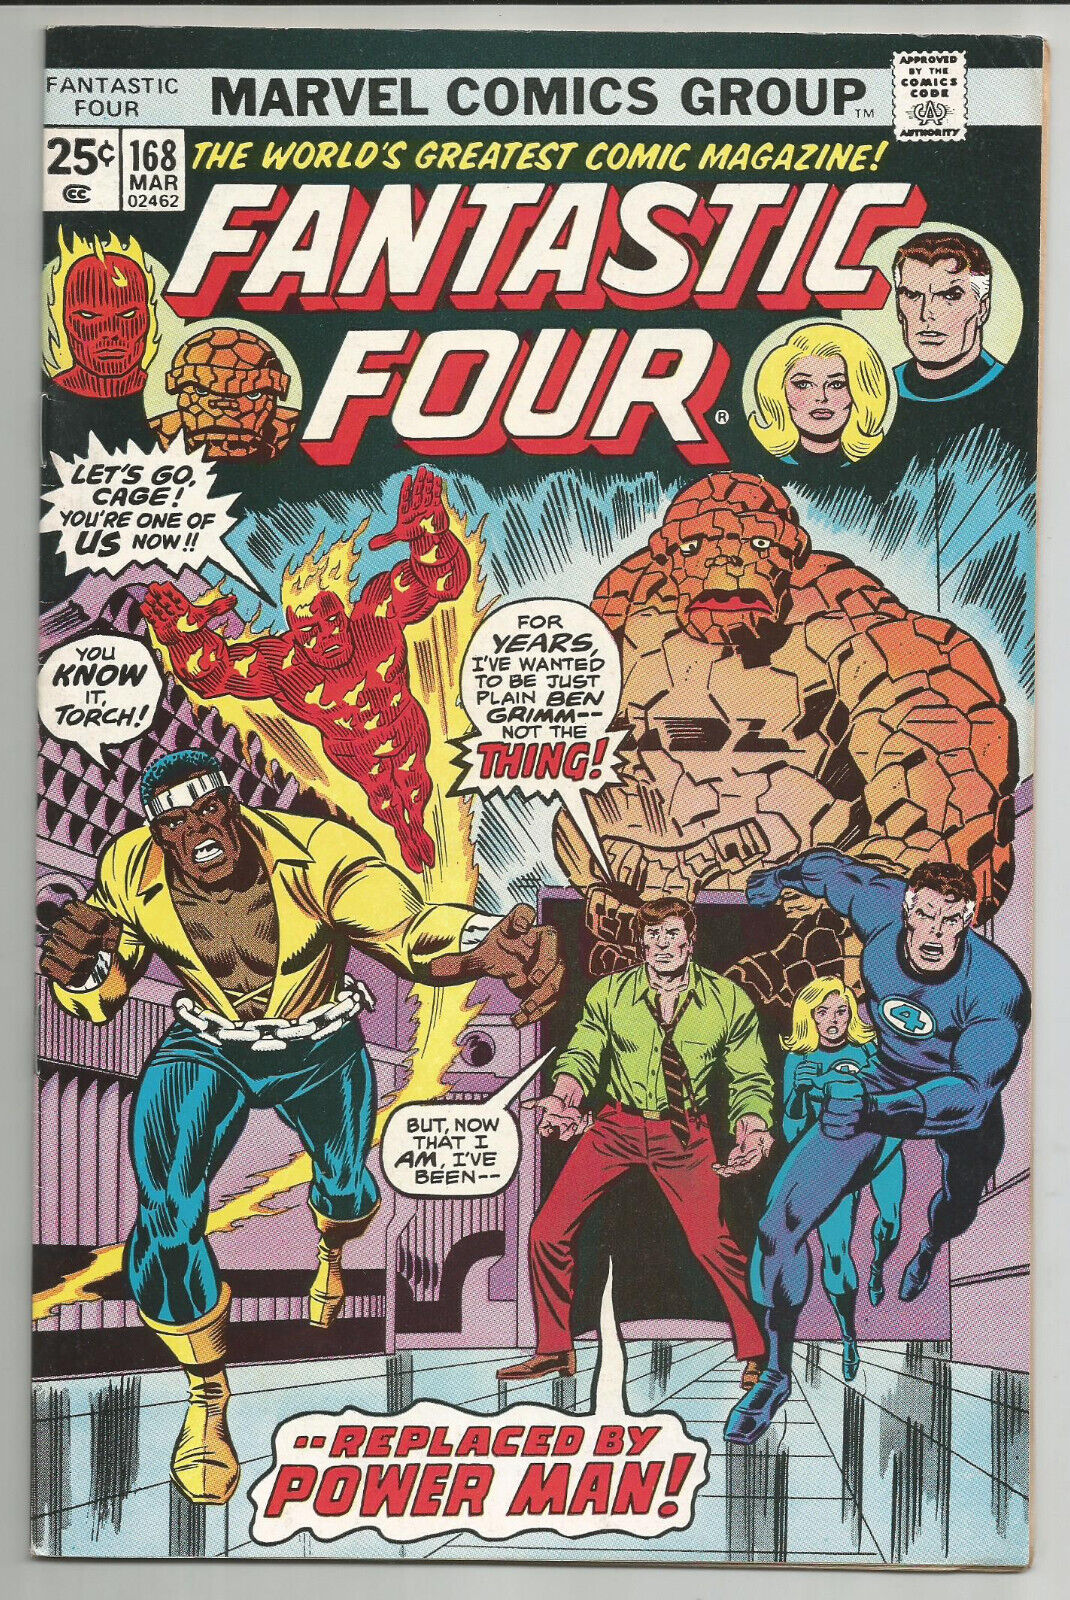 FANTASTIC FOUR #168 - POWER MAN LUKE CAGE REPLACES THING - MARVEL 1976